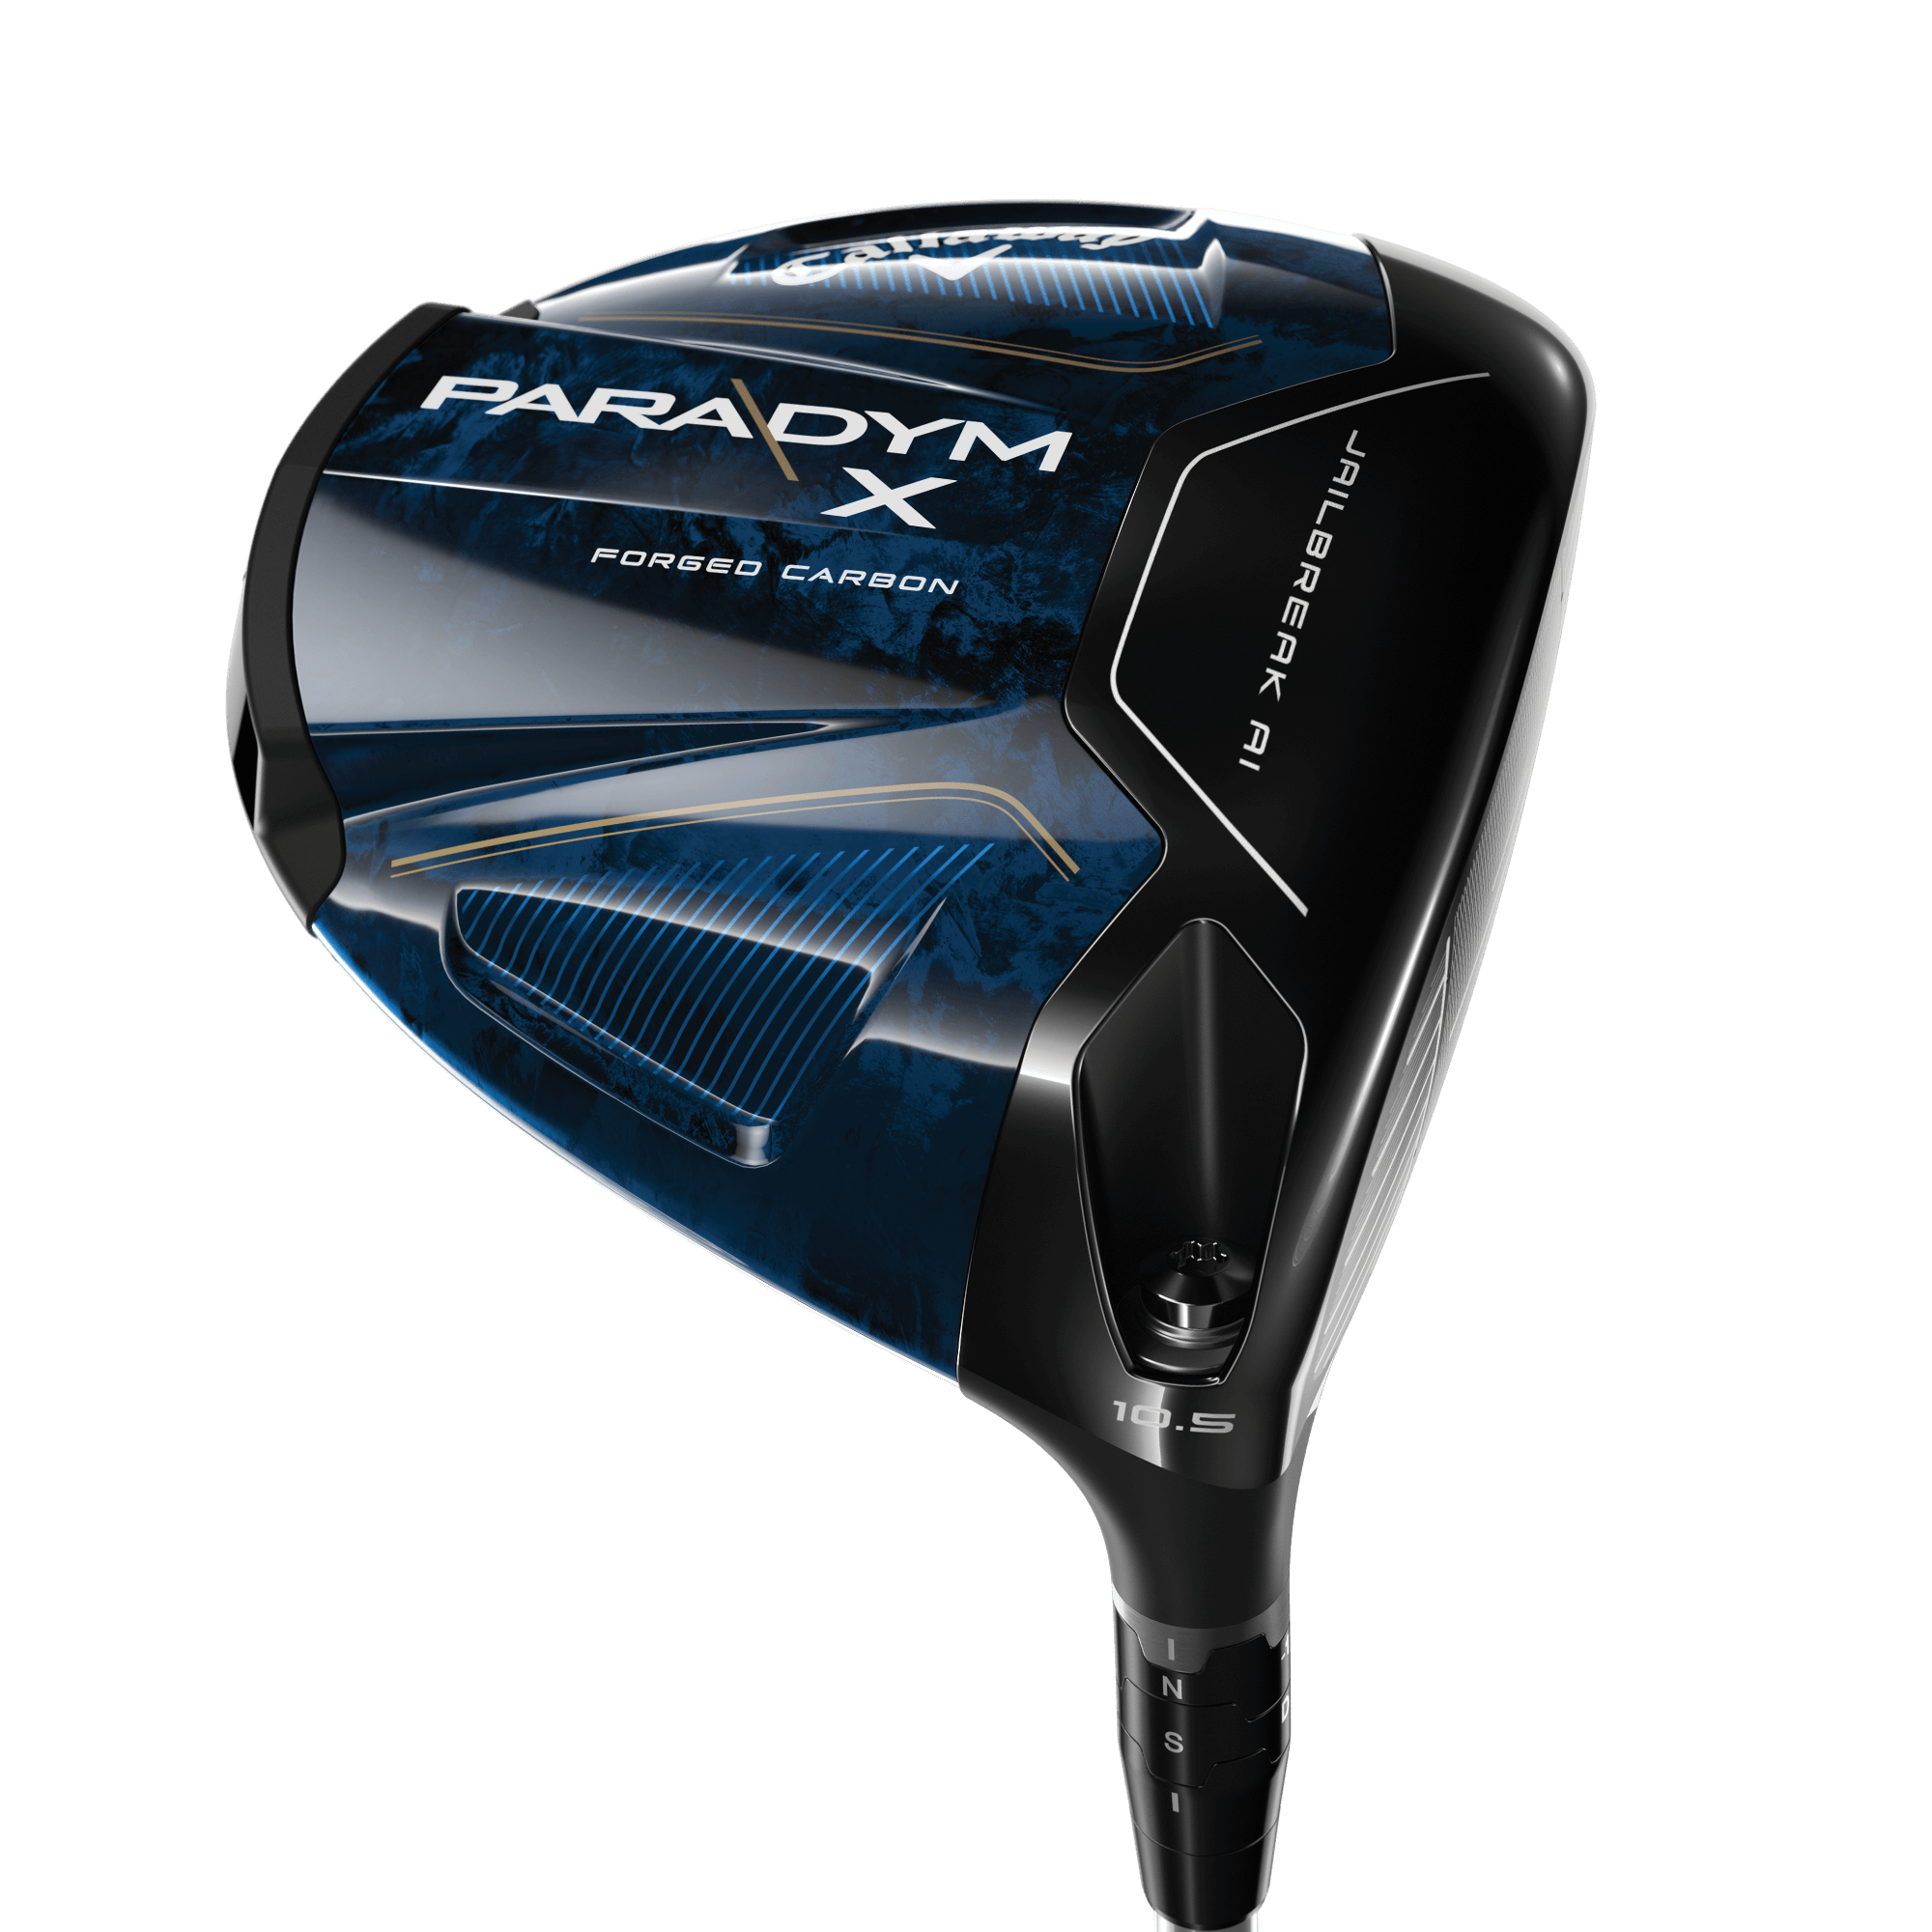 Paradym X Drivers | Callaway Golf Pre-Owned